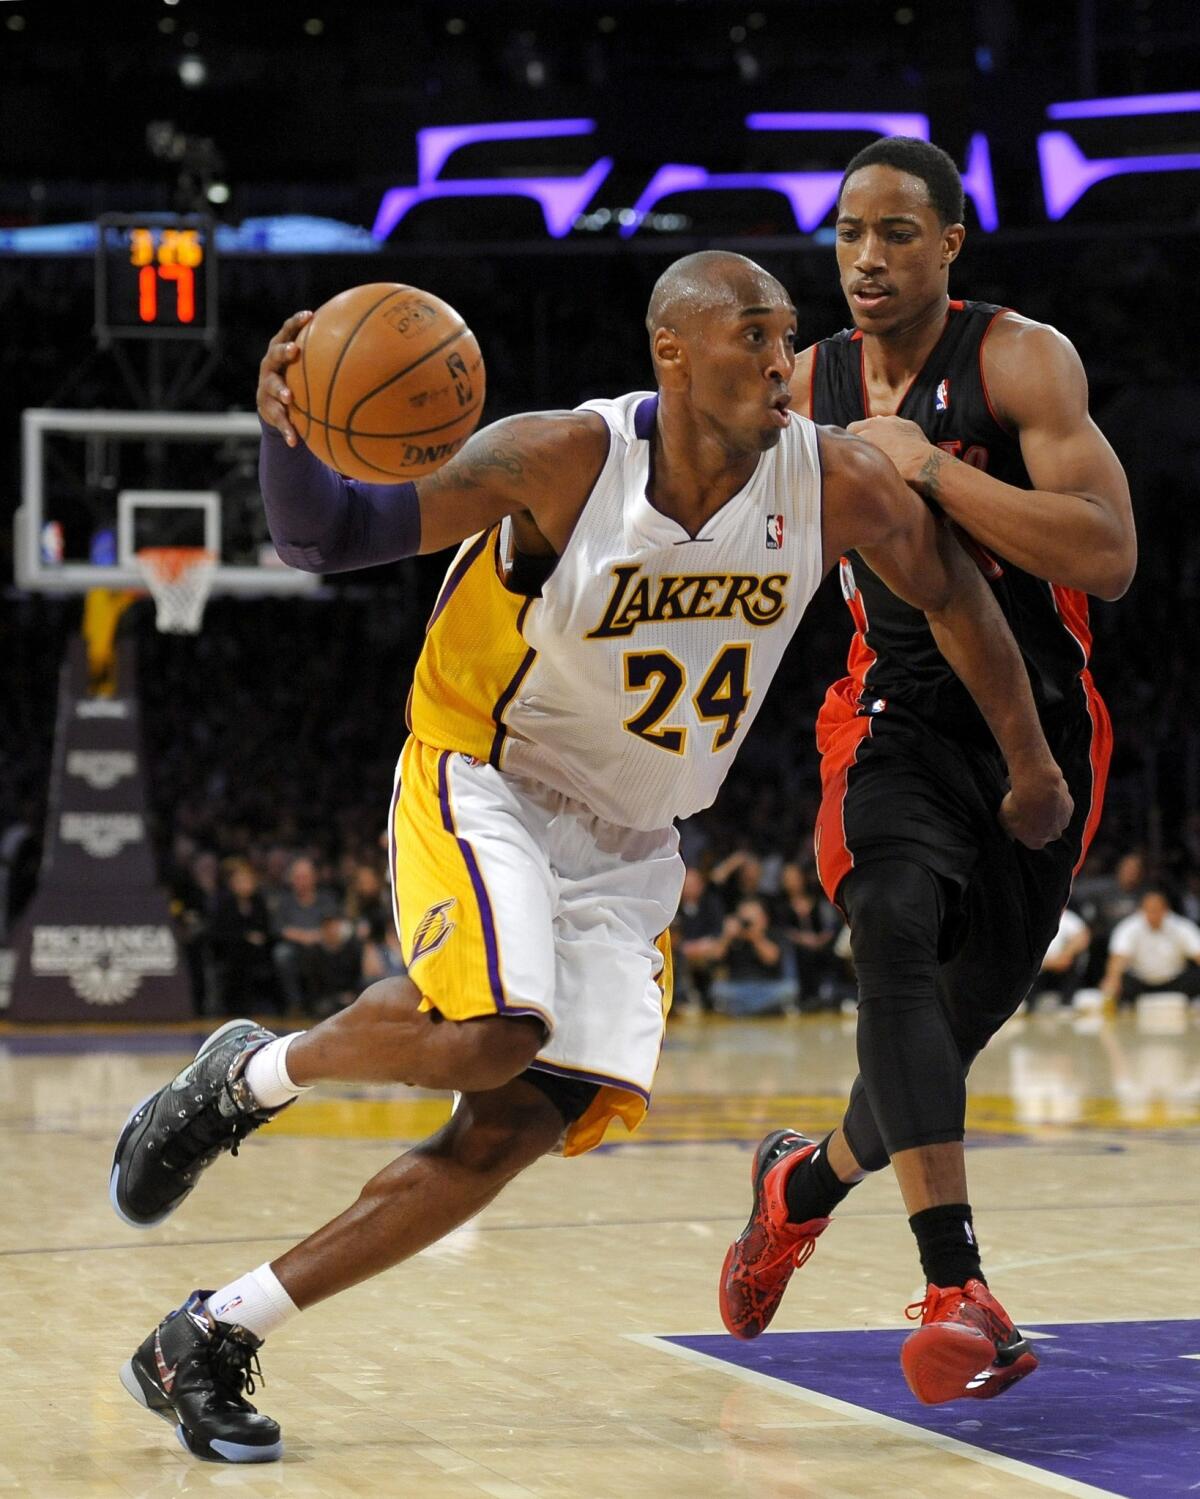 Lakers star Kobe Bryant, left, drives past Toronto's DeMar DeRozan during the Lakers' 106-94 loss Sunday night at Staples Center.